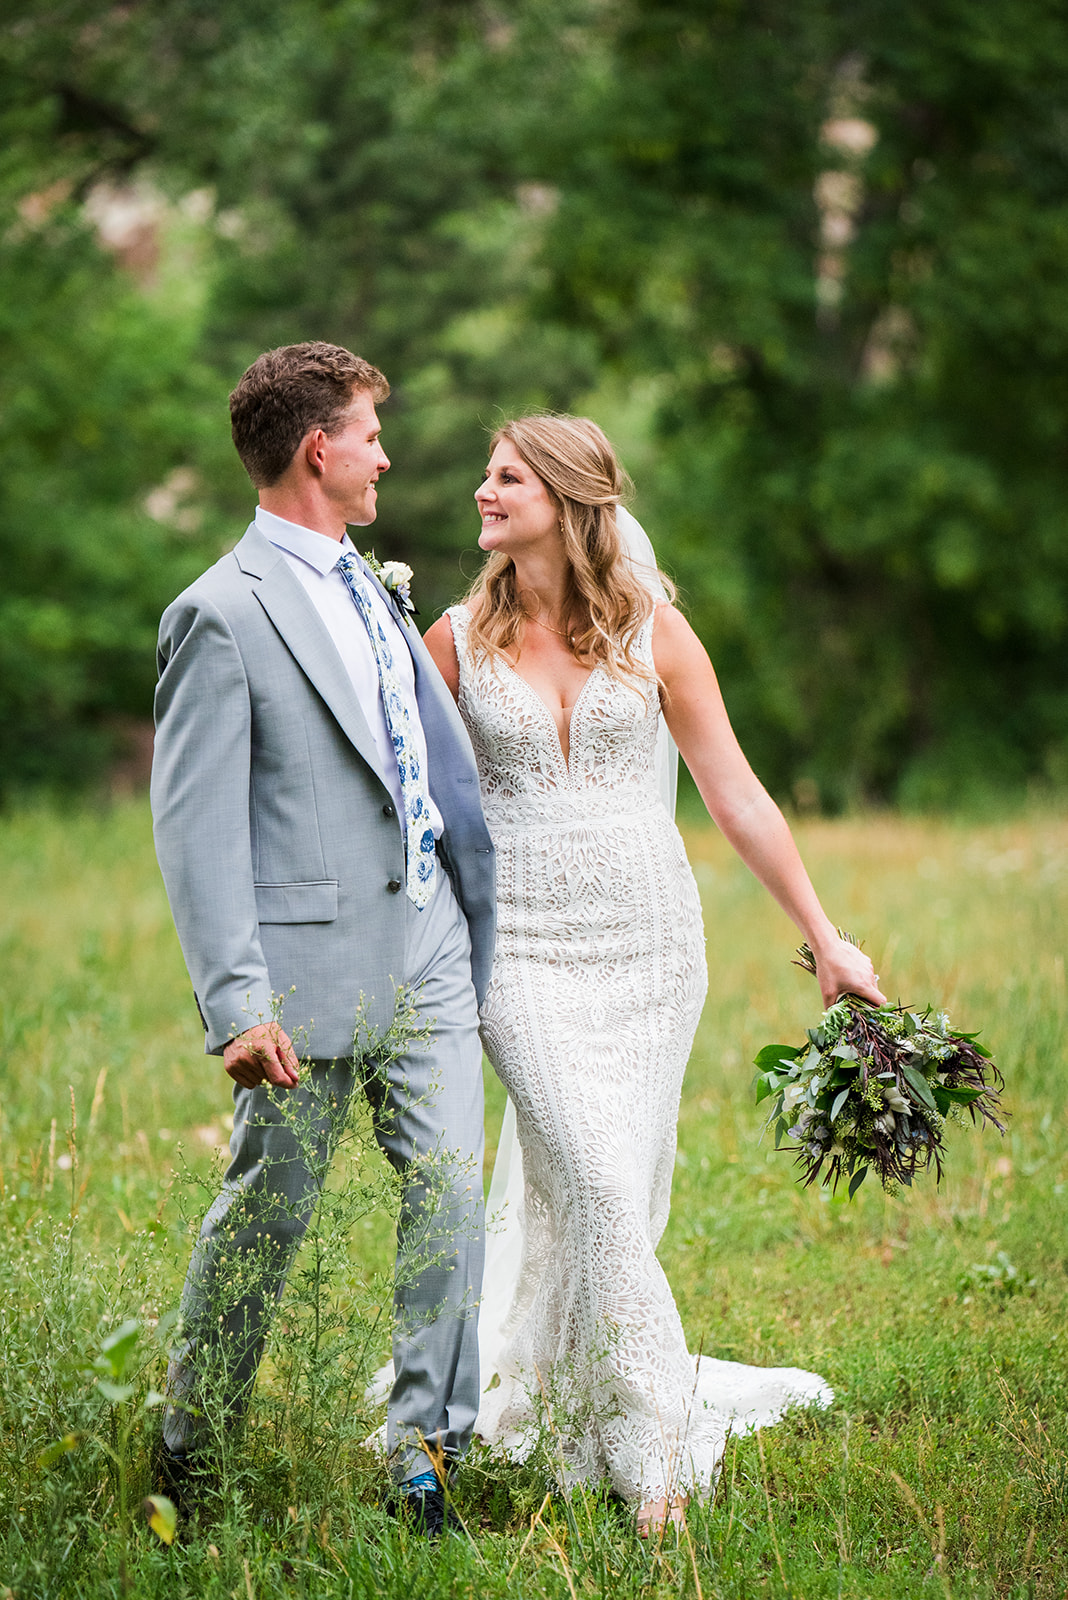 Bride and groom walk through a grassy field hand-in-hand and smile at eachother.